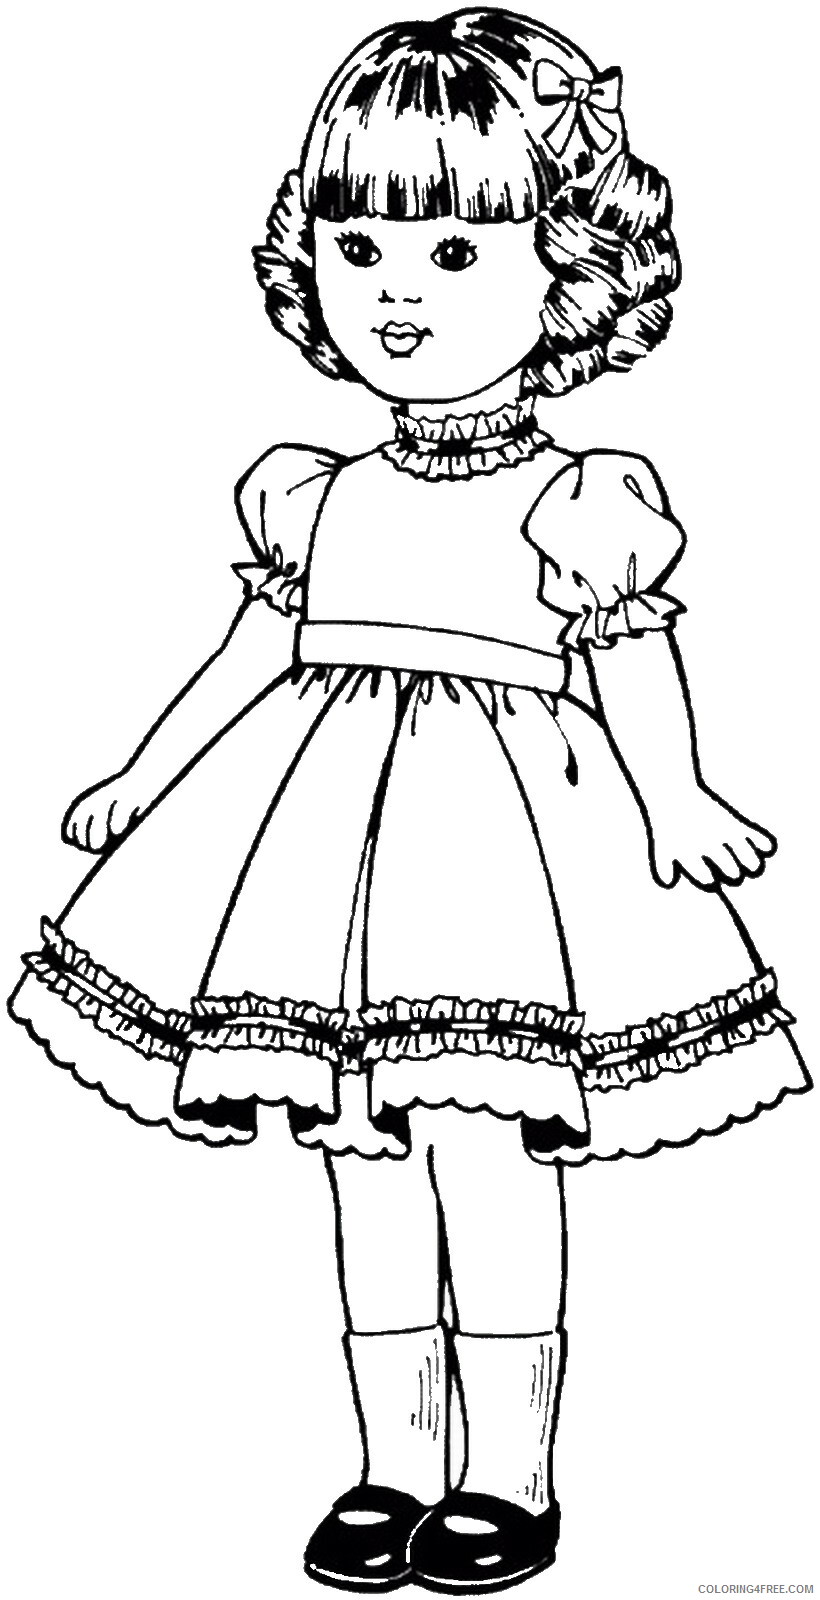 Doll Coloring Pages for Girls dolls_16 Printable 2021 0377 Coloring4free